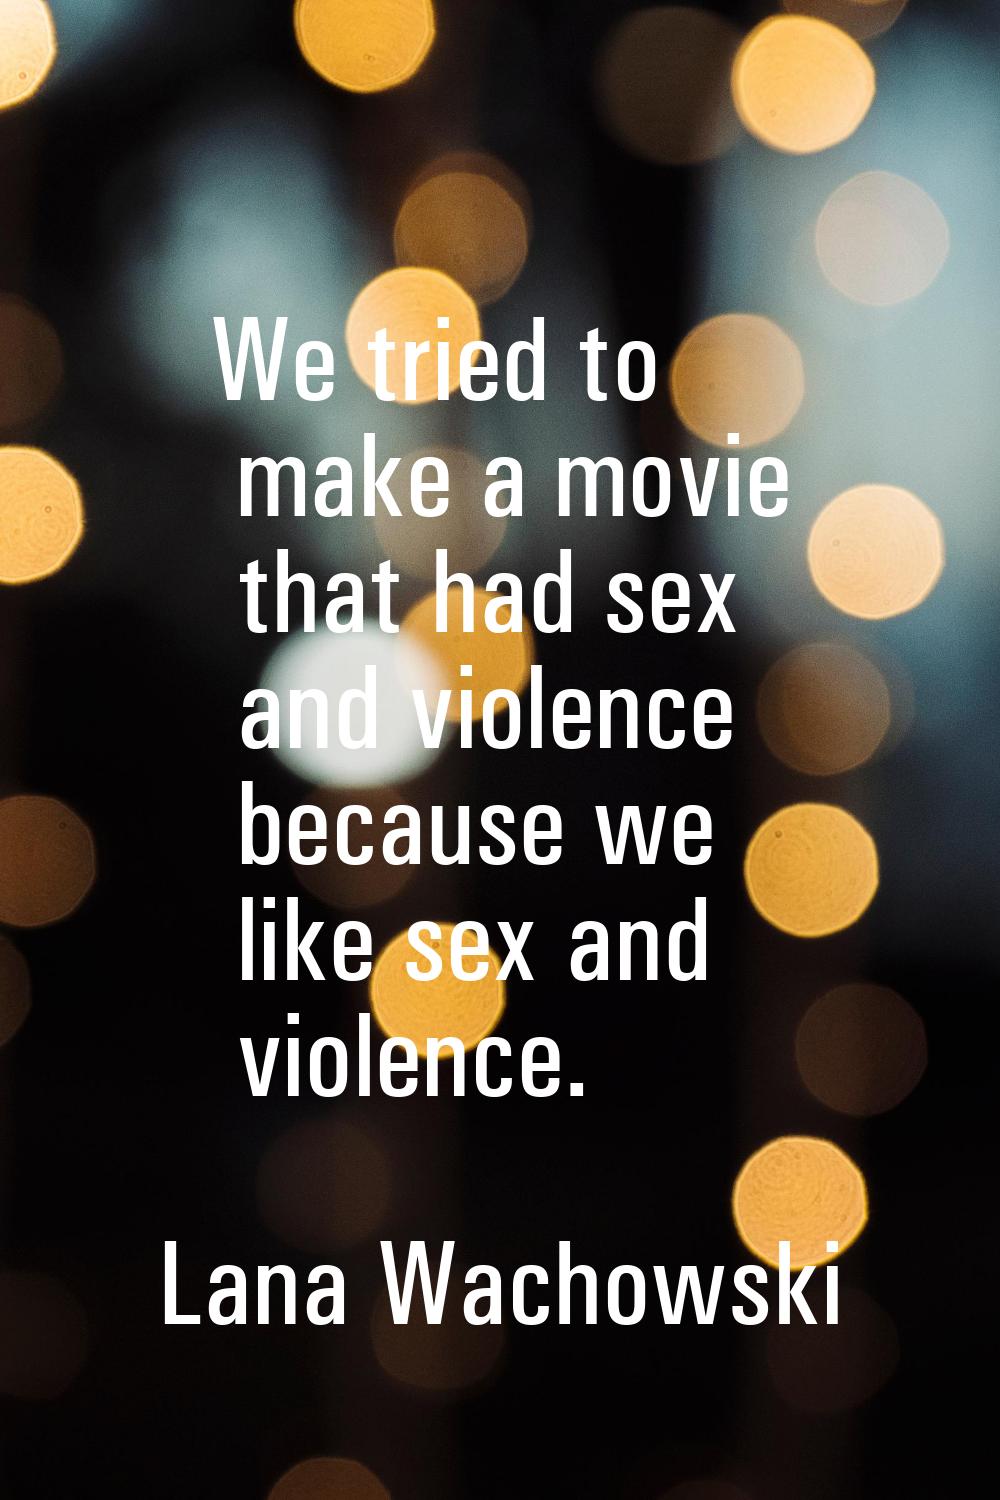 We tried to make a movie that had sex and violence because we like sex and violence.